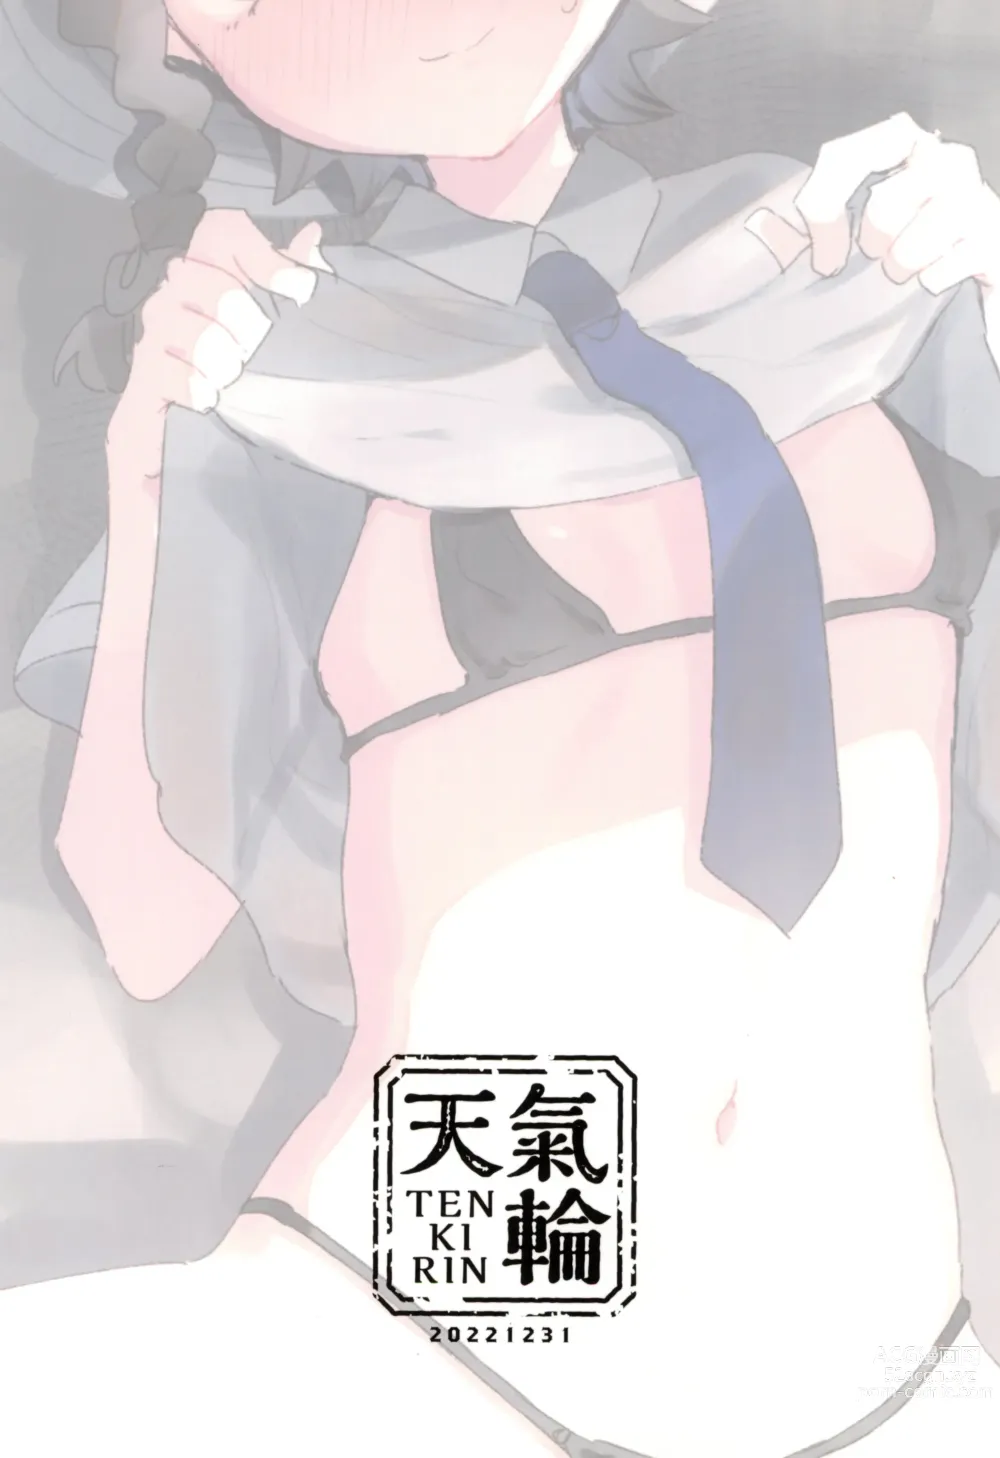 Page 16 of doujinshi 因为零花钱，完全不够用嘛